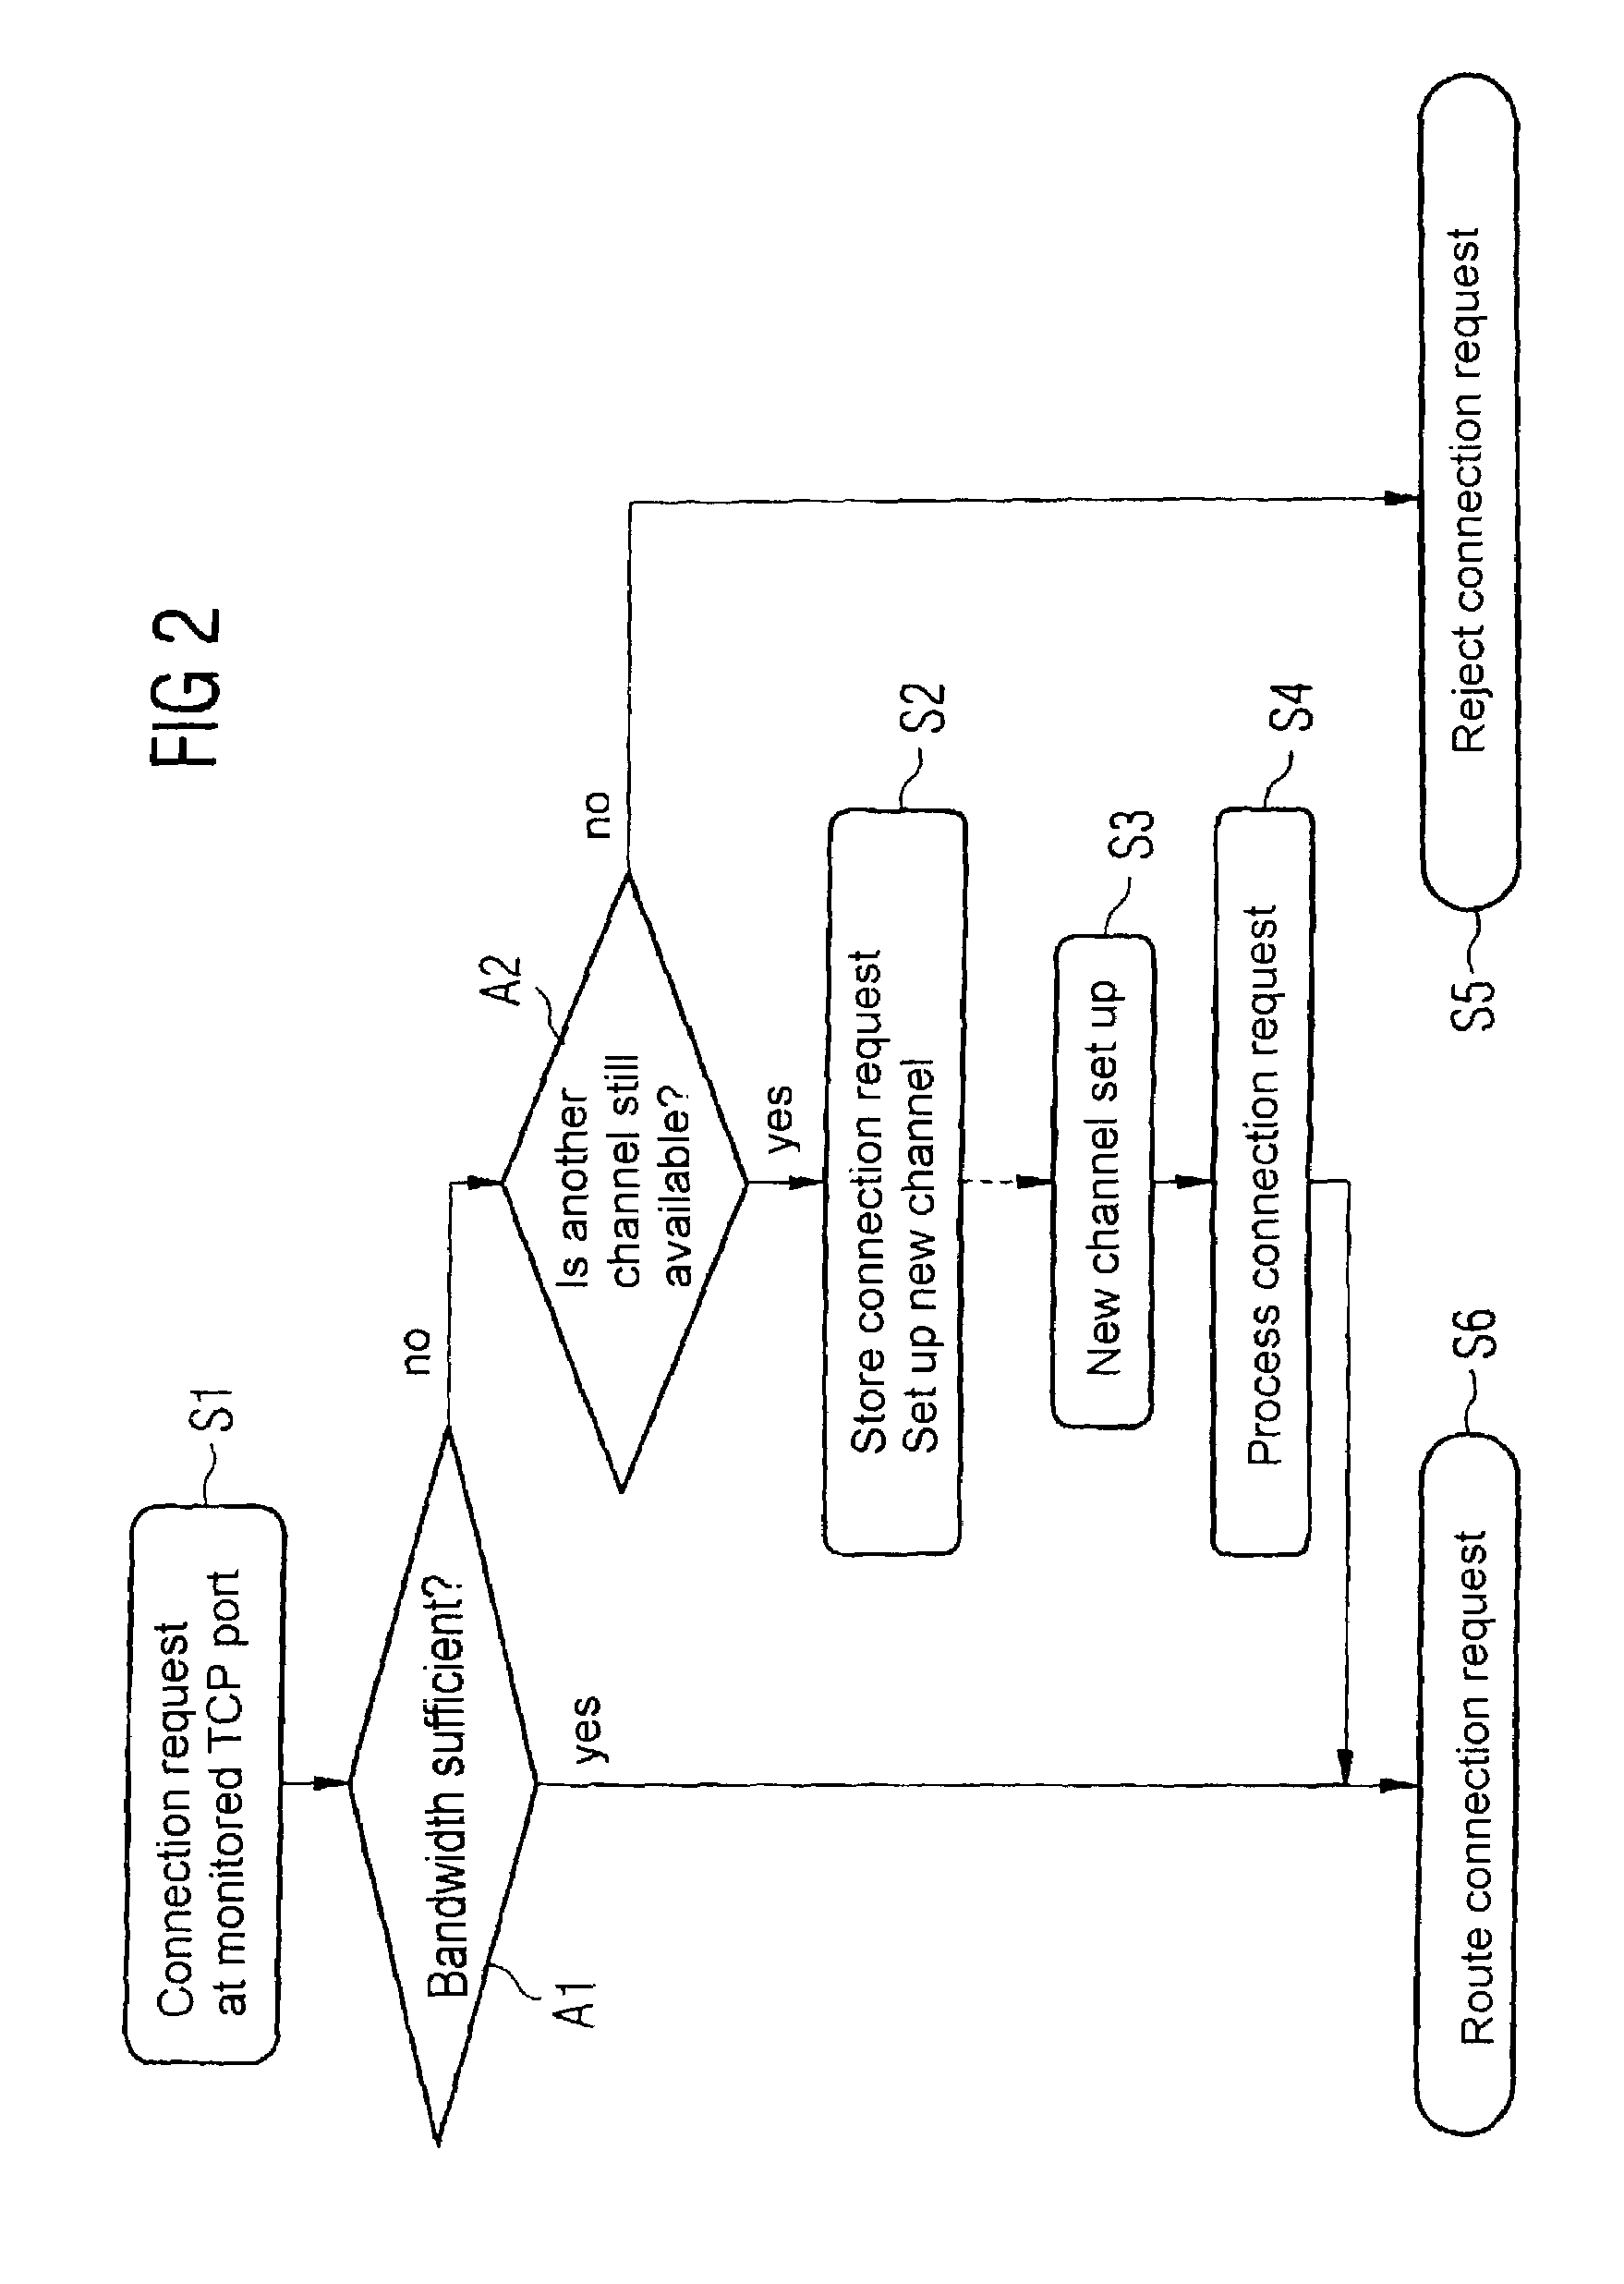 Method and apparatus for adjusting the bandwidth of a connection between at least two communication endpoints in a data network